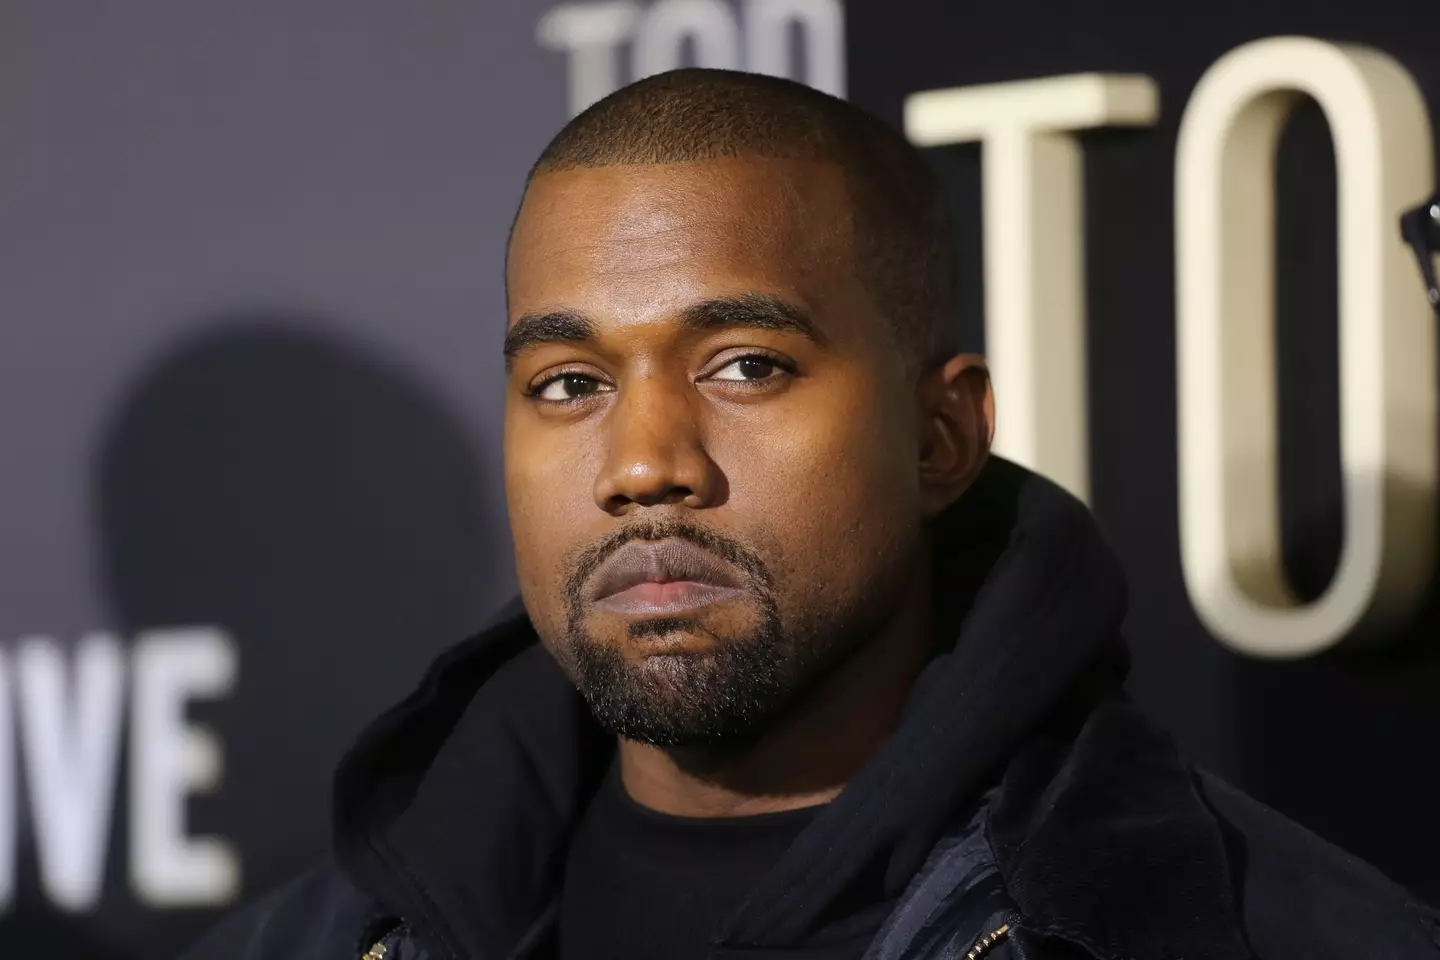 Kanye West's music will not be removed from Spotify.